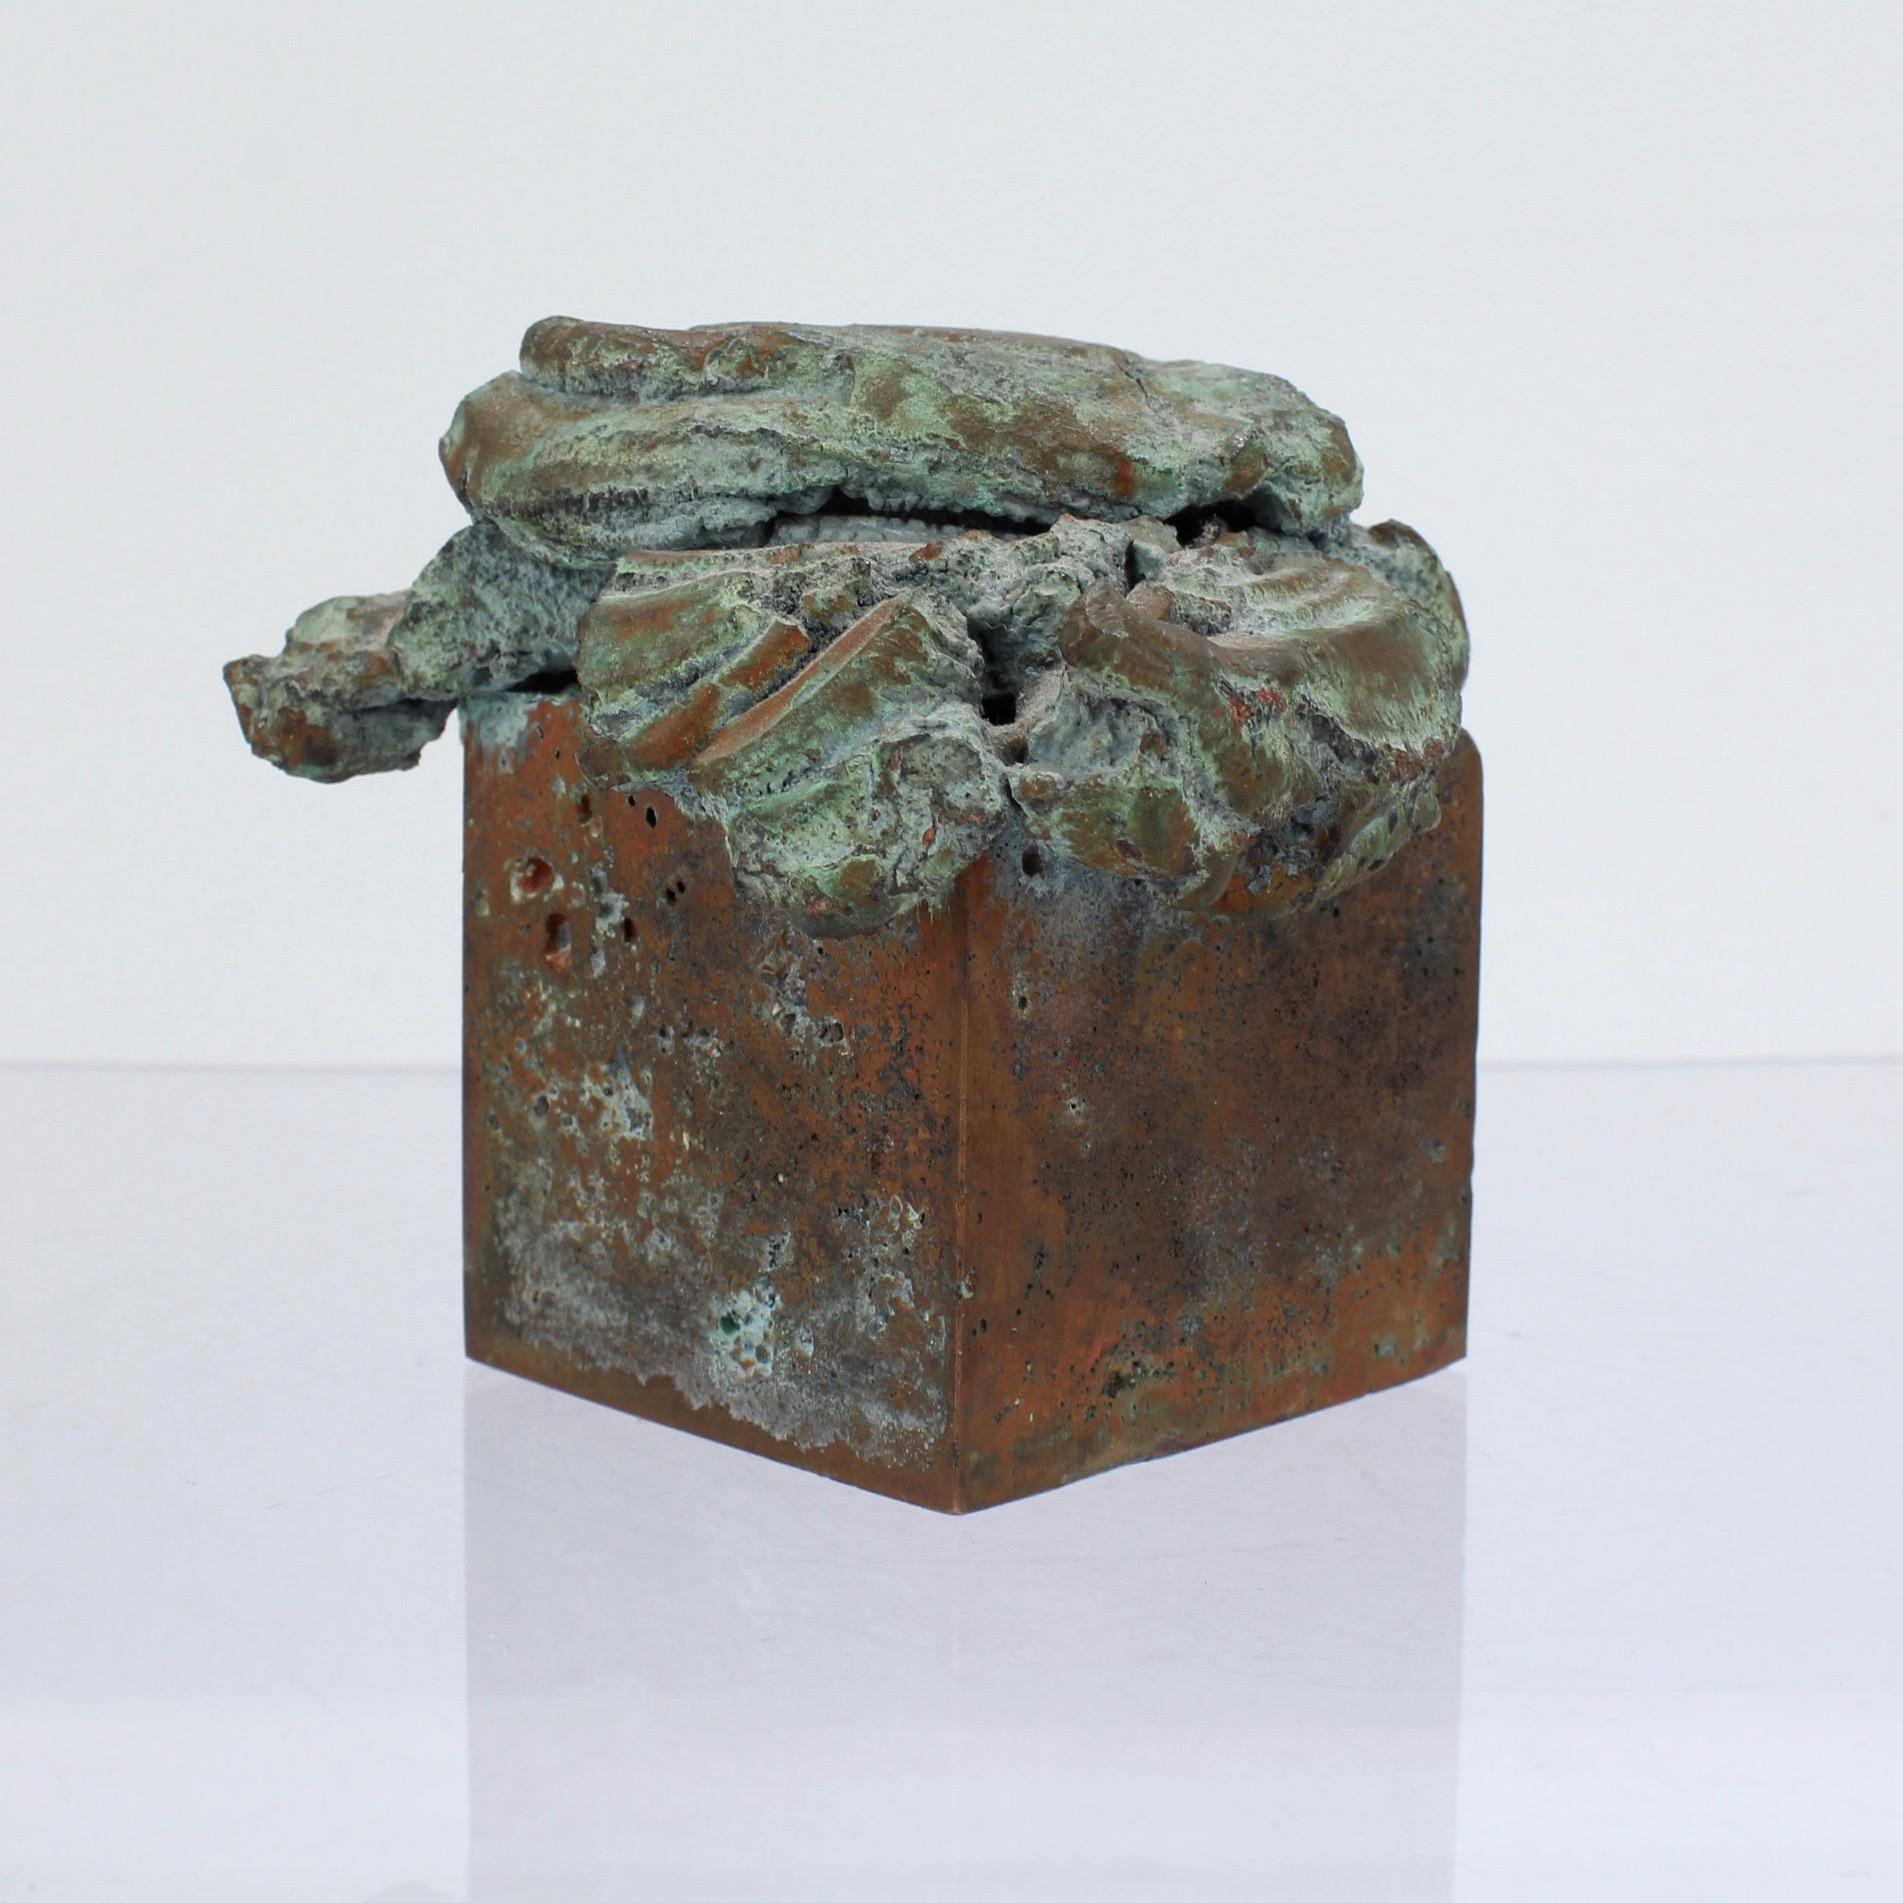 An original 'melt pressed' bronze sculpture by Harry Bertoia.

With a cube shaped base, pressed top, and verdigris patina throughout.

These rare, small-scale, experimental works were often done by Bertoia after hours in his shop.

This bronze